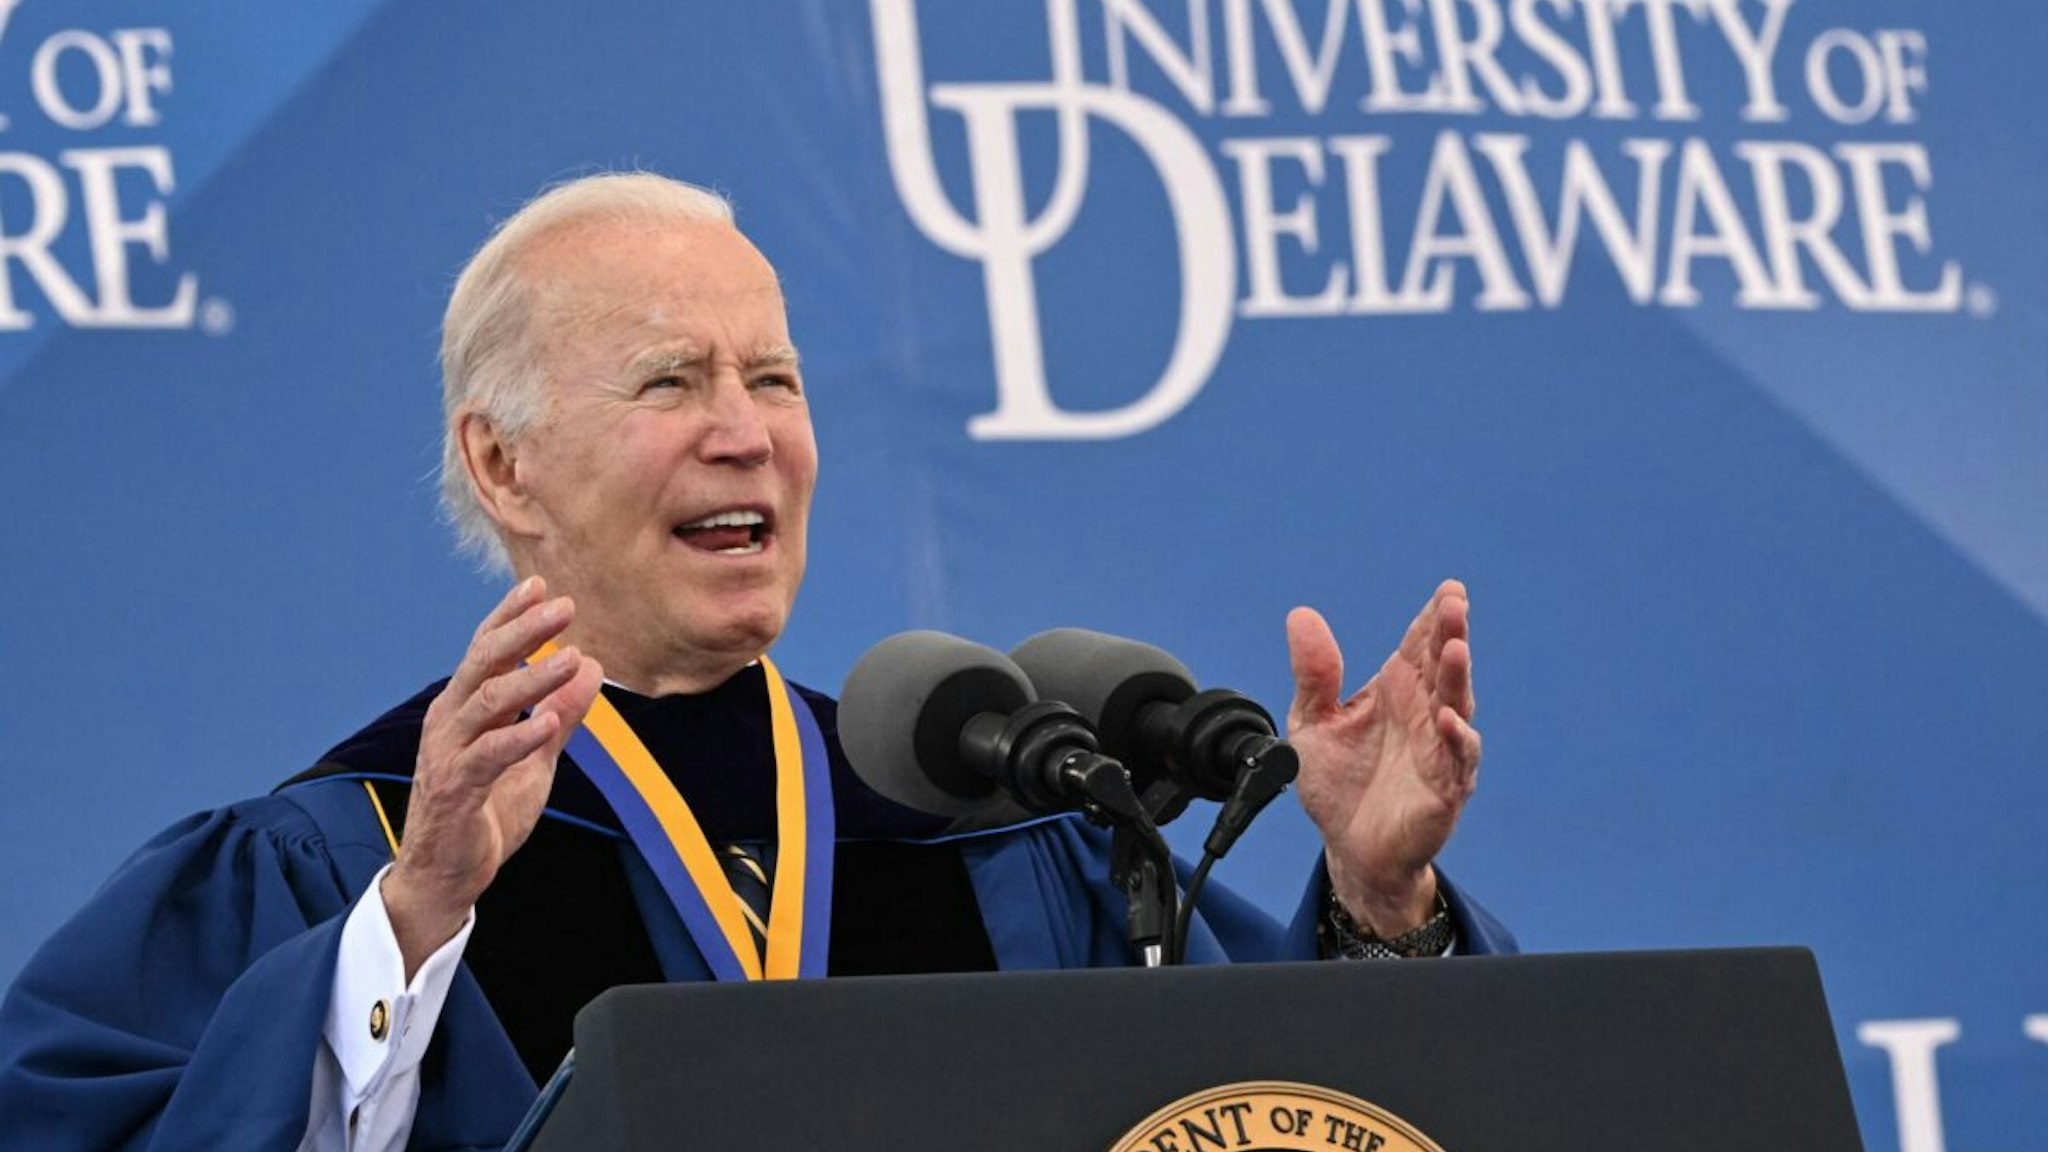 US President Joe Biden delivers the commencement address for his alma mater, the University of Delaware, at Delaware Stadium, in Newark, Delaware, on May 28, 2022.